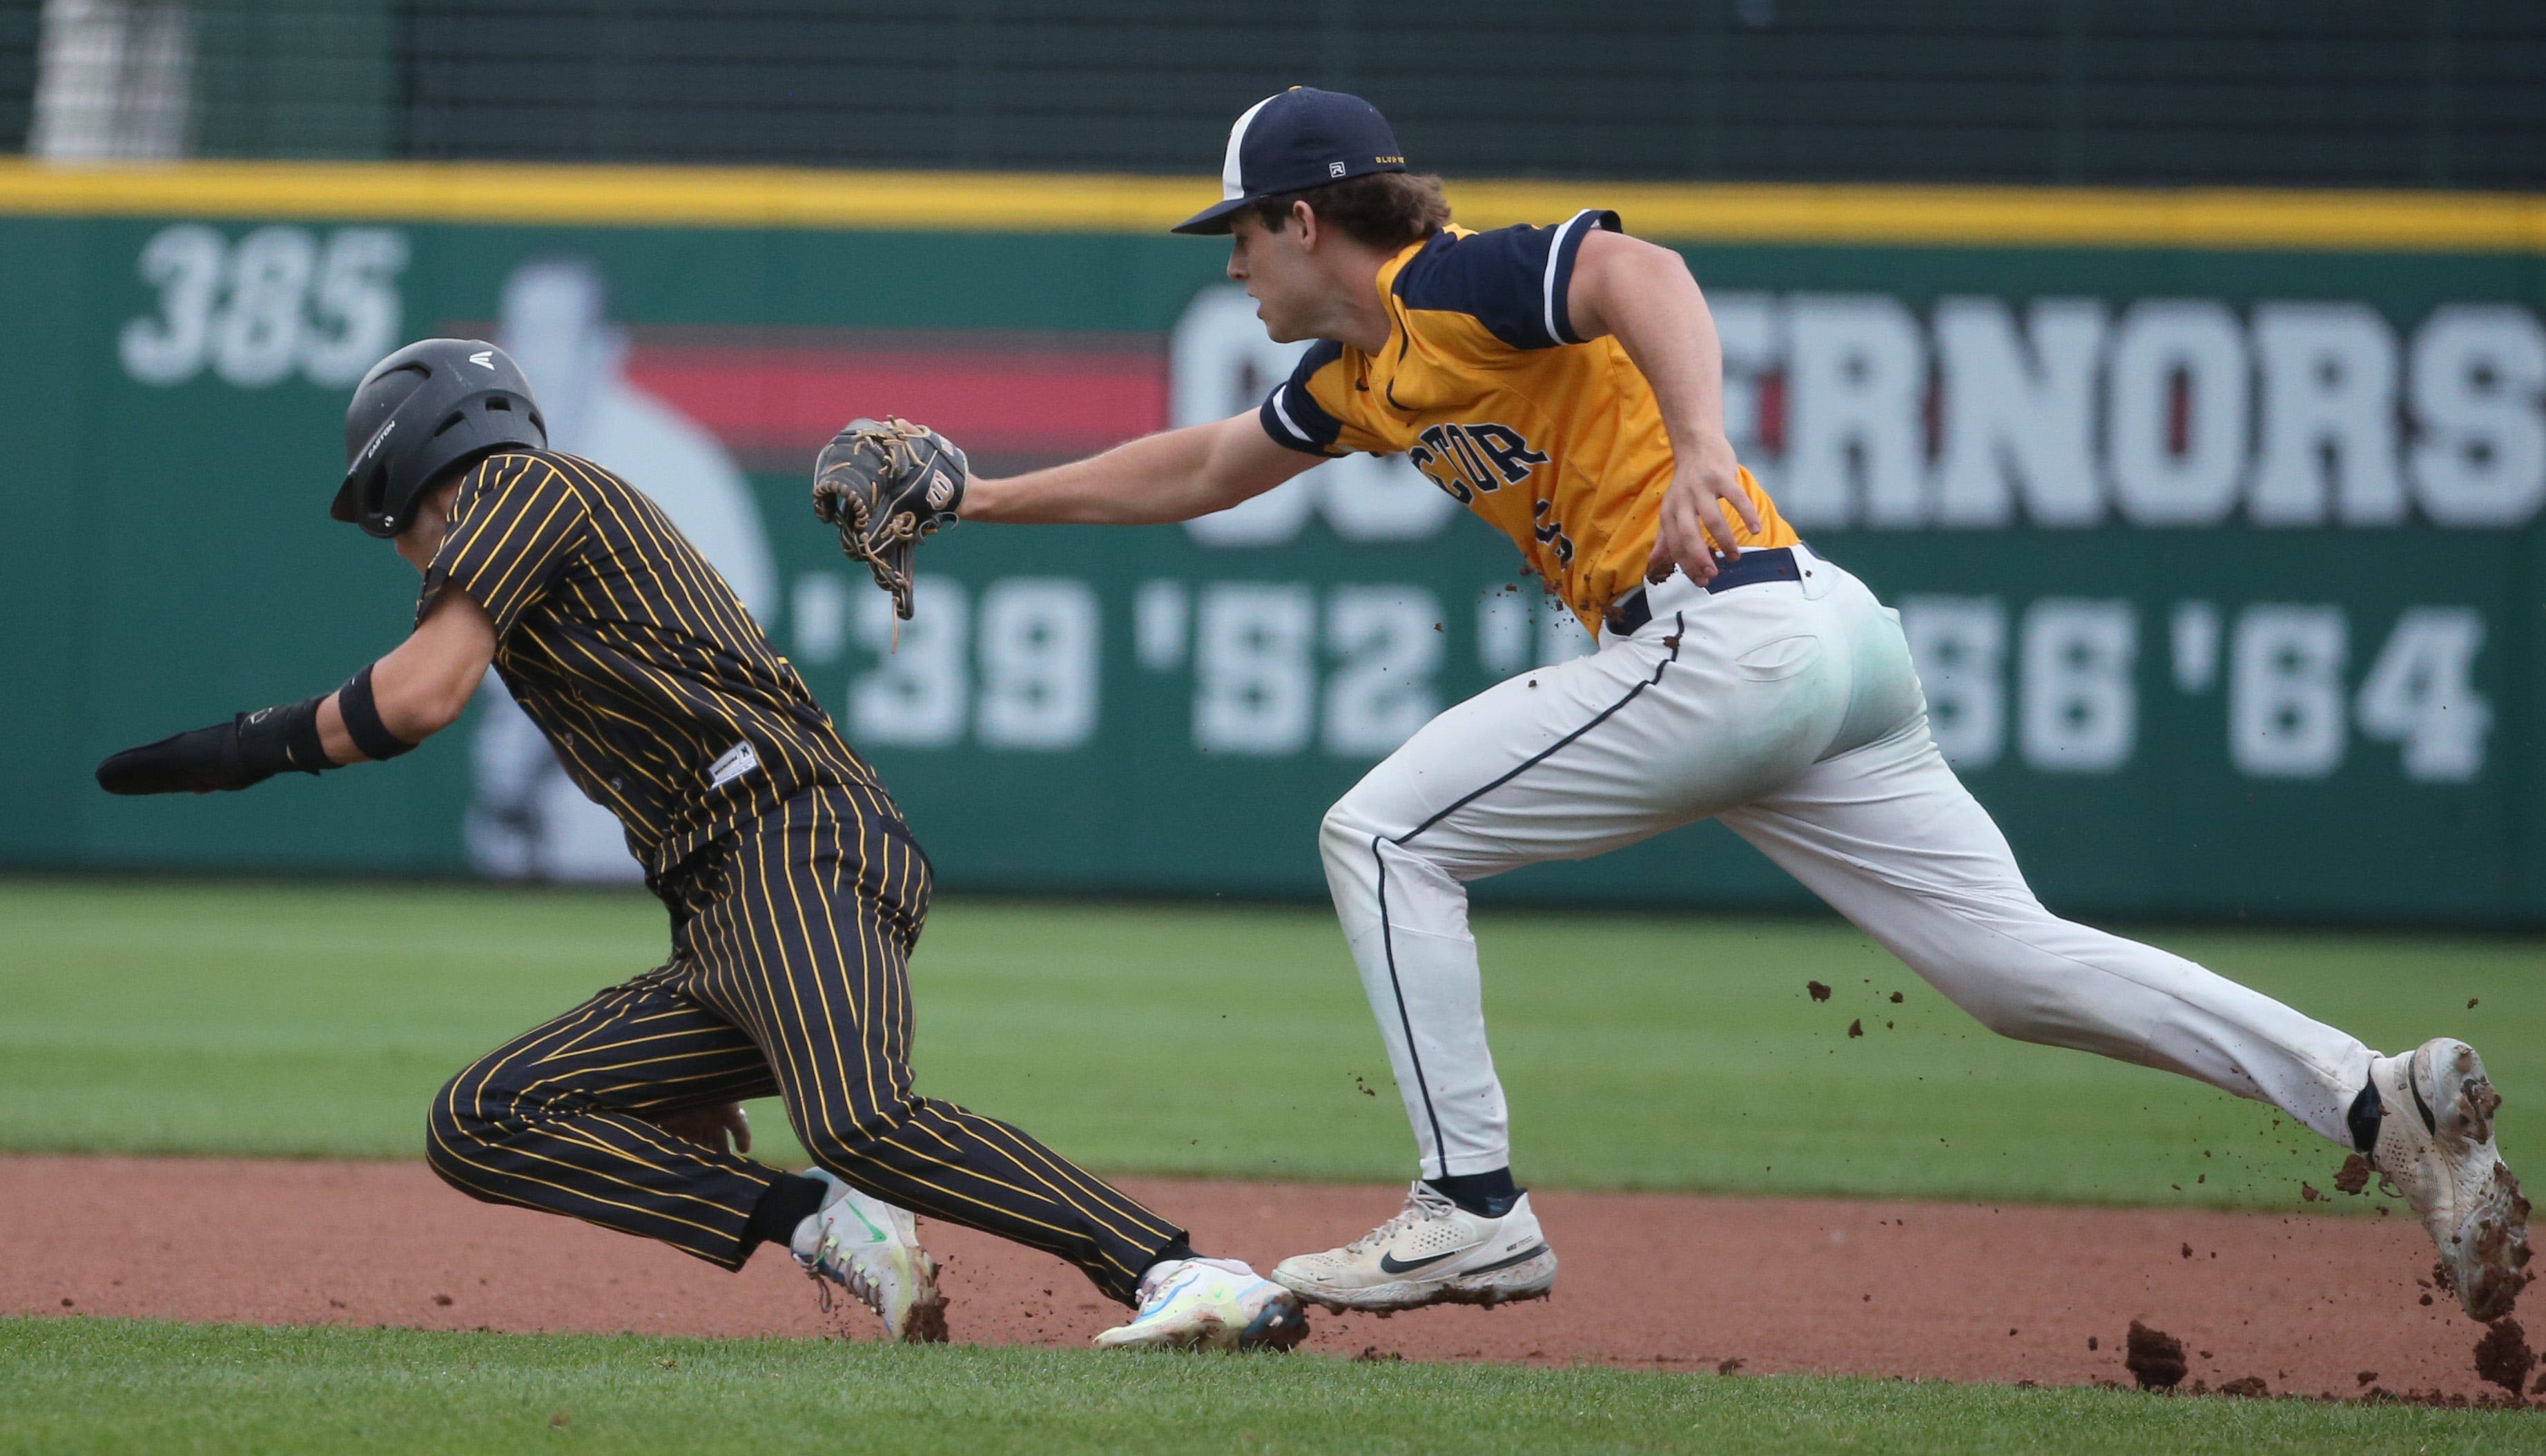 Victor overwhelms Greece Athena to win Section V baseball title